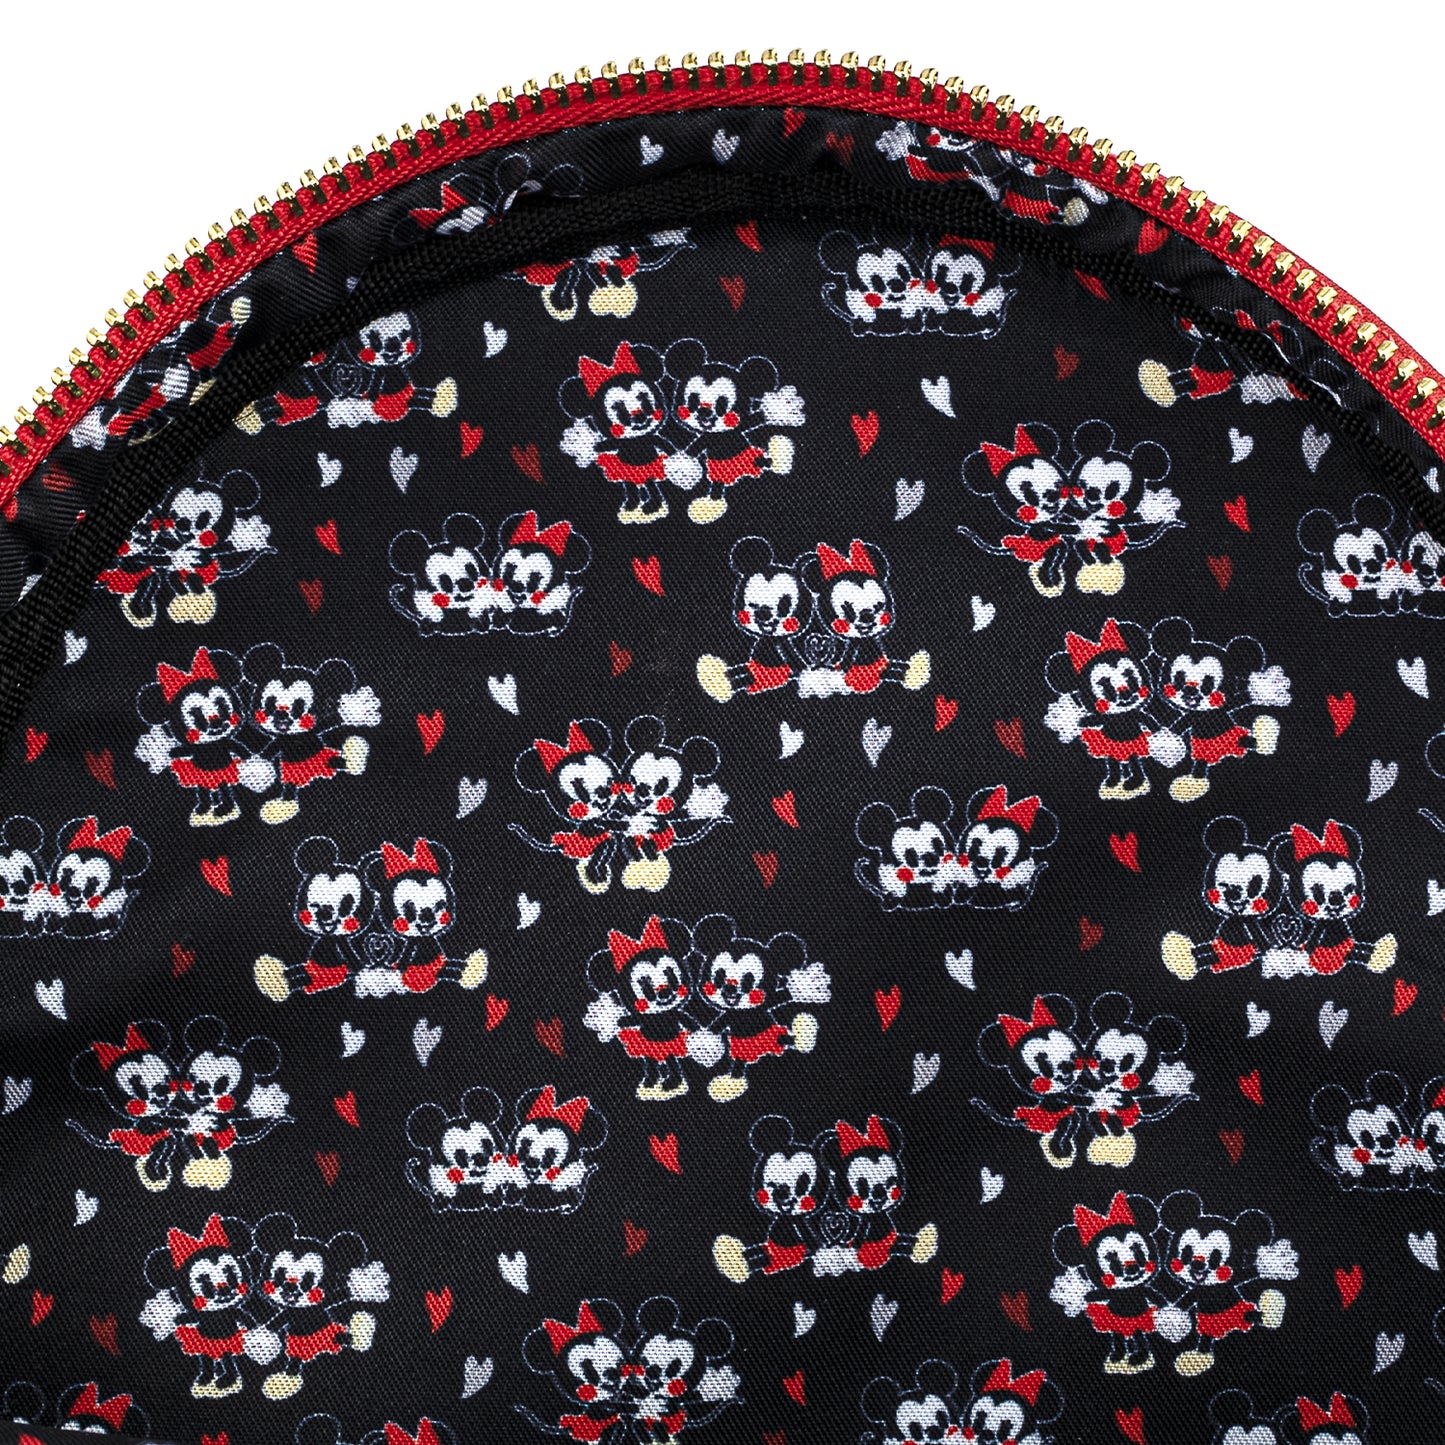 Loungefly x Disney Mickey & Minnie Mouse Love Heart AOP Mini Backpack